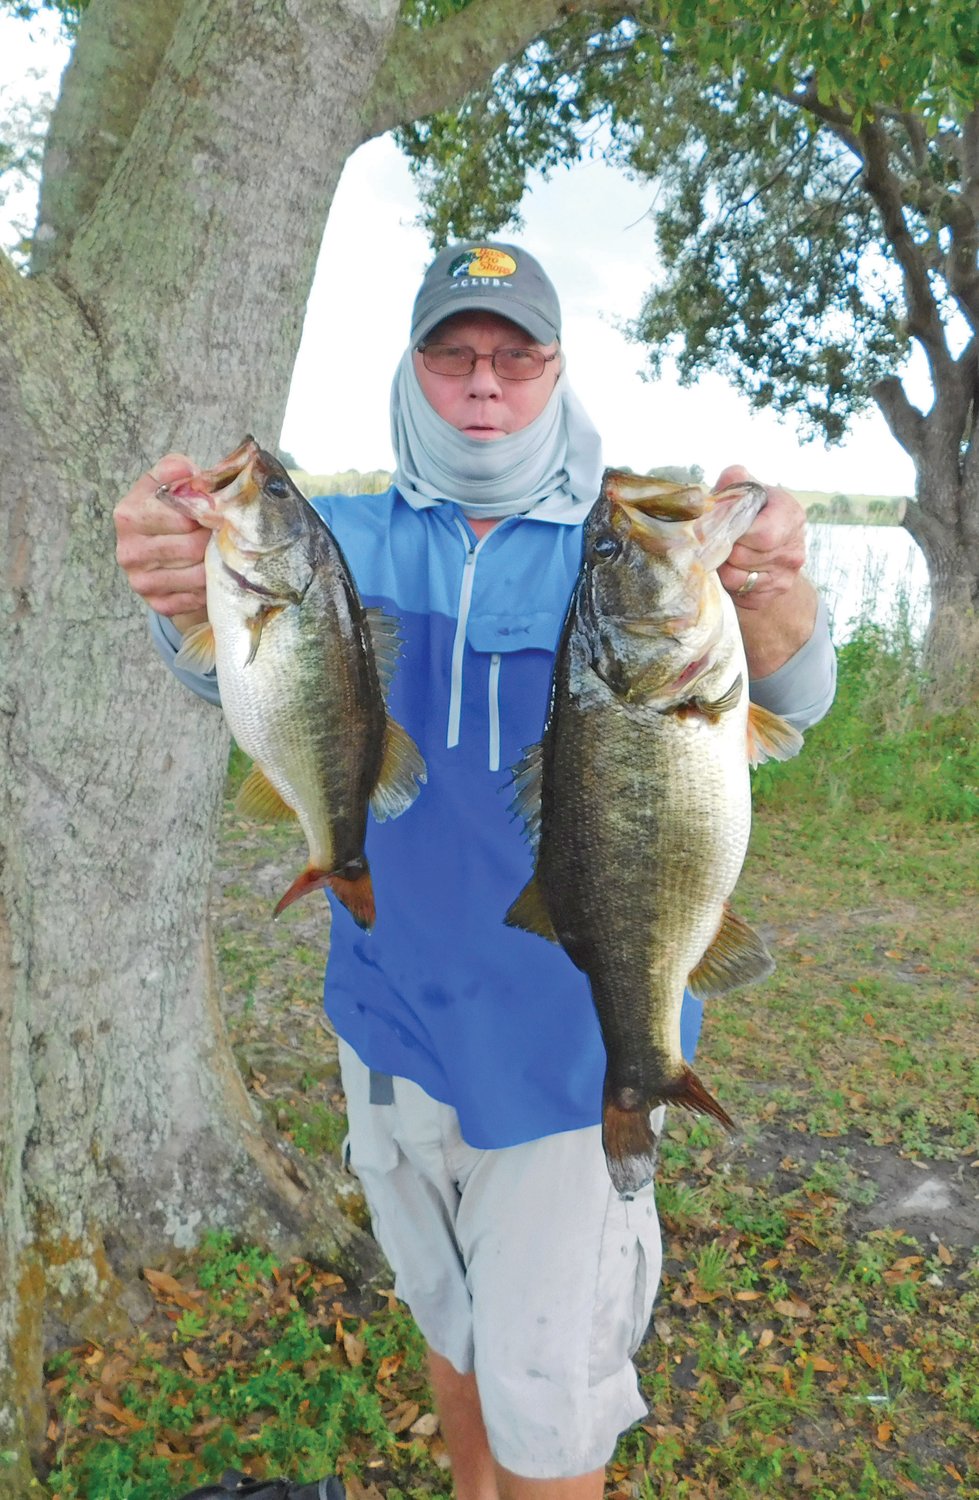 Jim Newell and Billy Ellerbee placed sixth with 12.95 pounds.